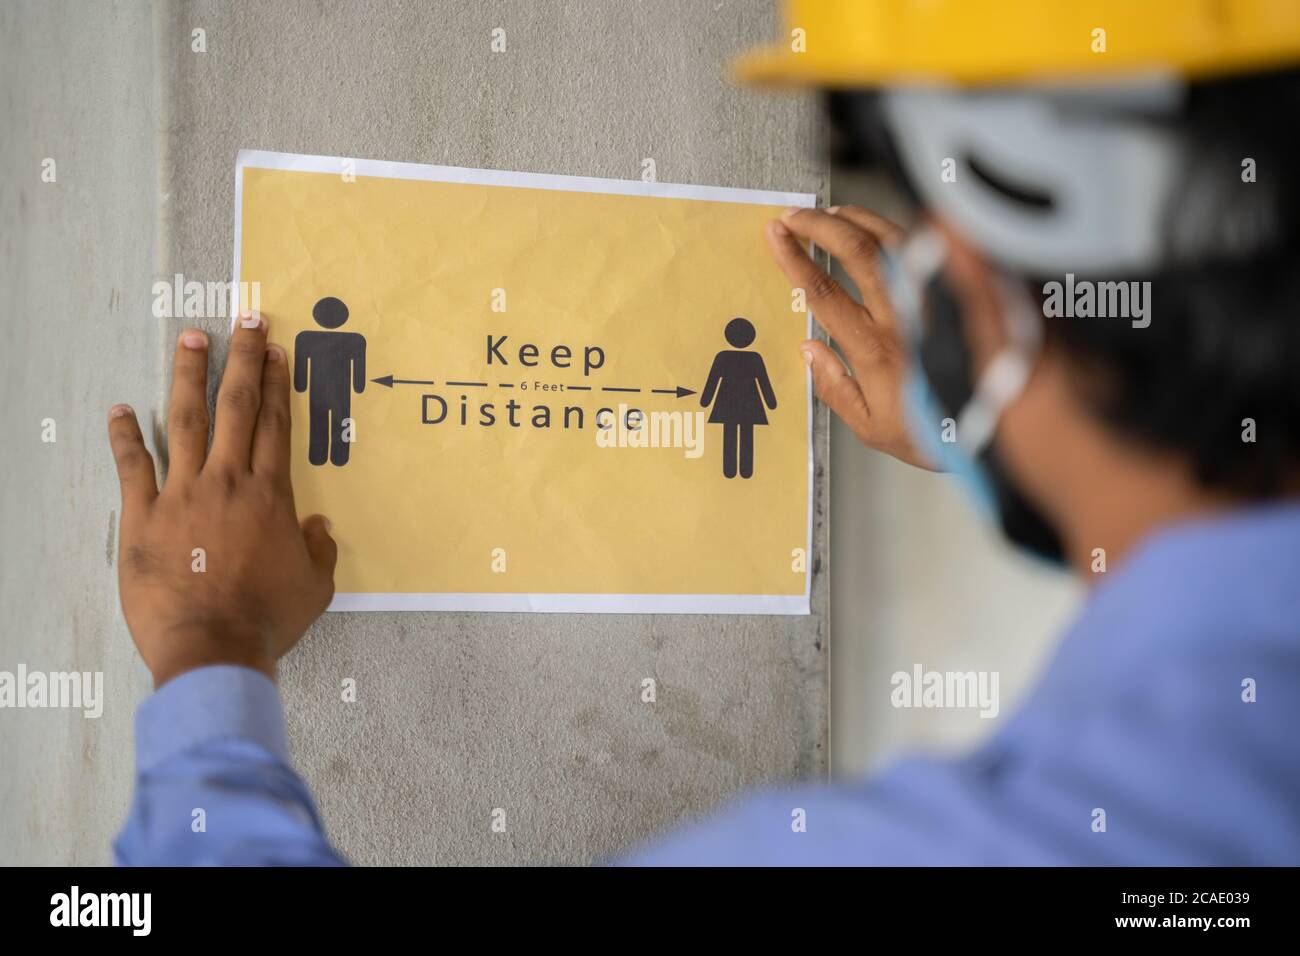 worker pasting Keep 6 feet distance on wall at work place or construction site due to coronavirus or covid-19 pandemic - concept of safety measures Stock Photo